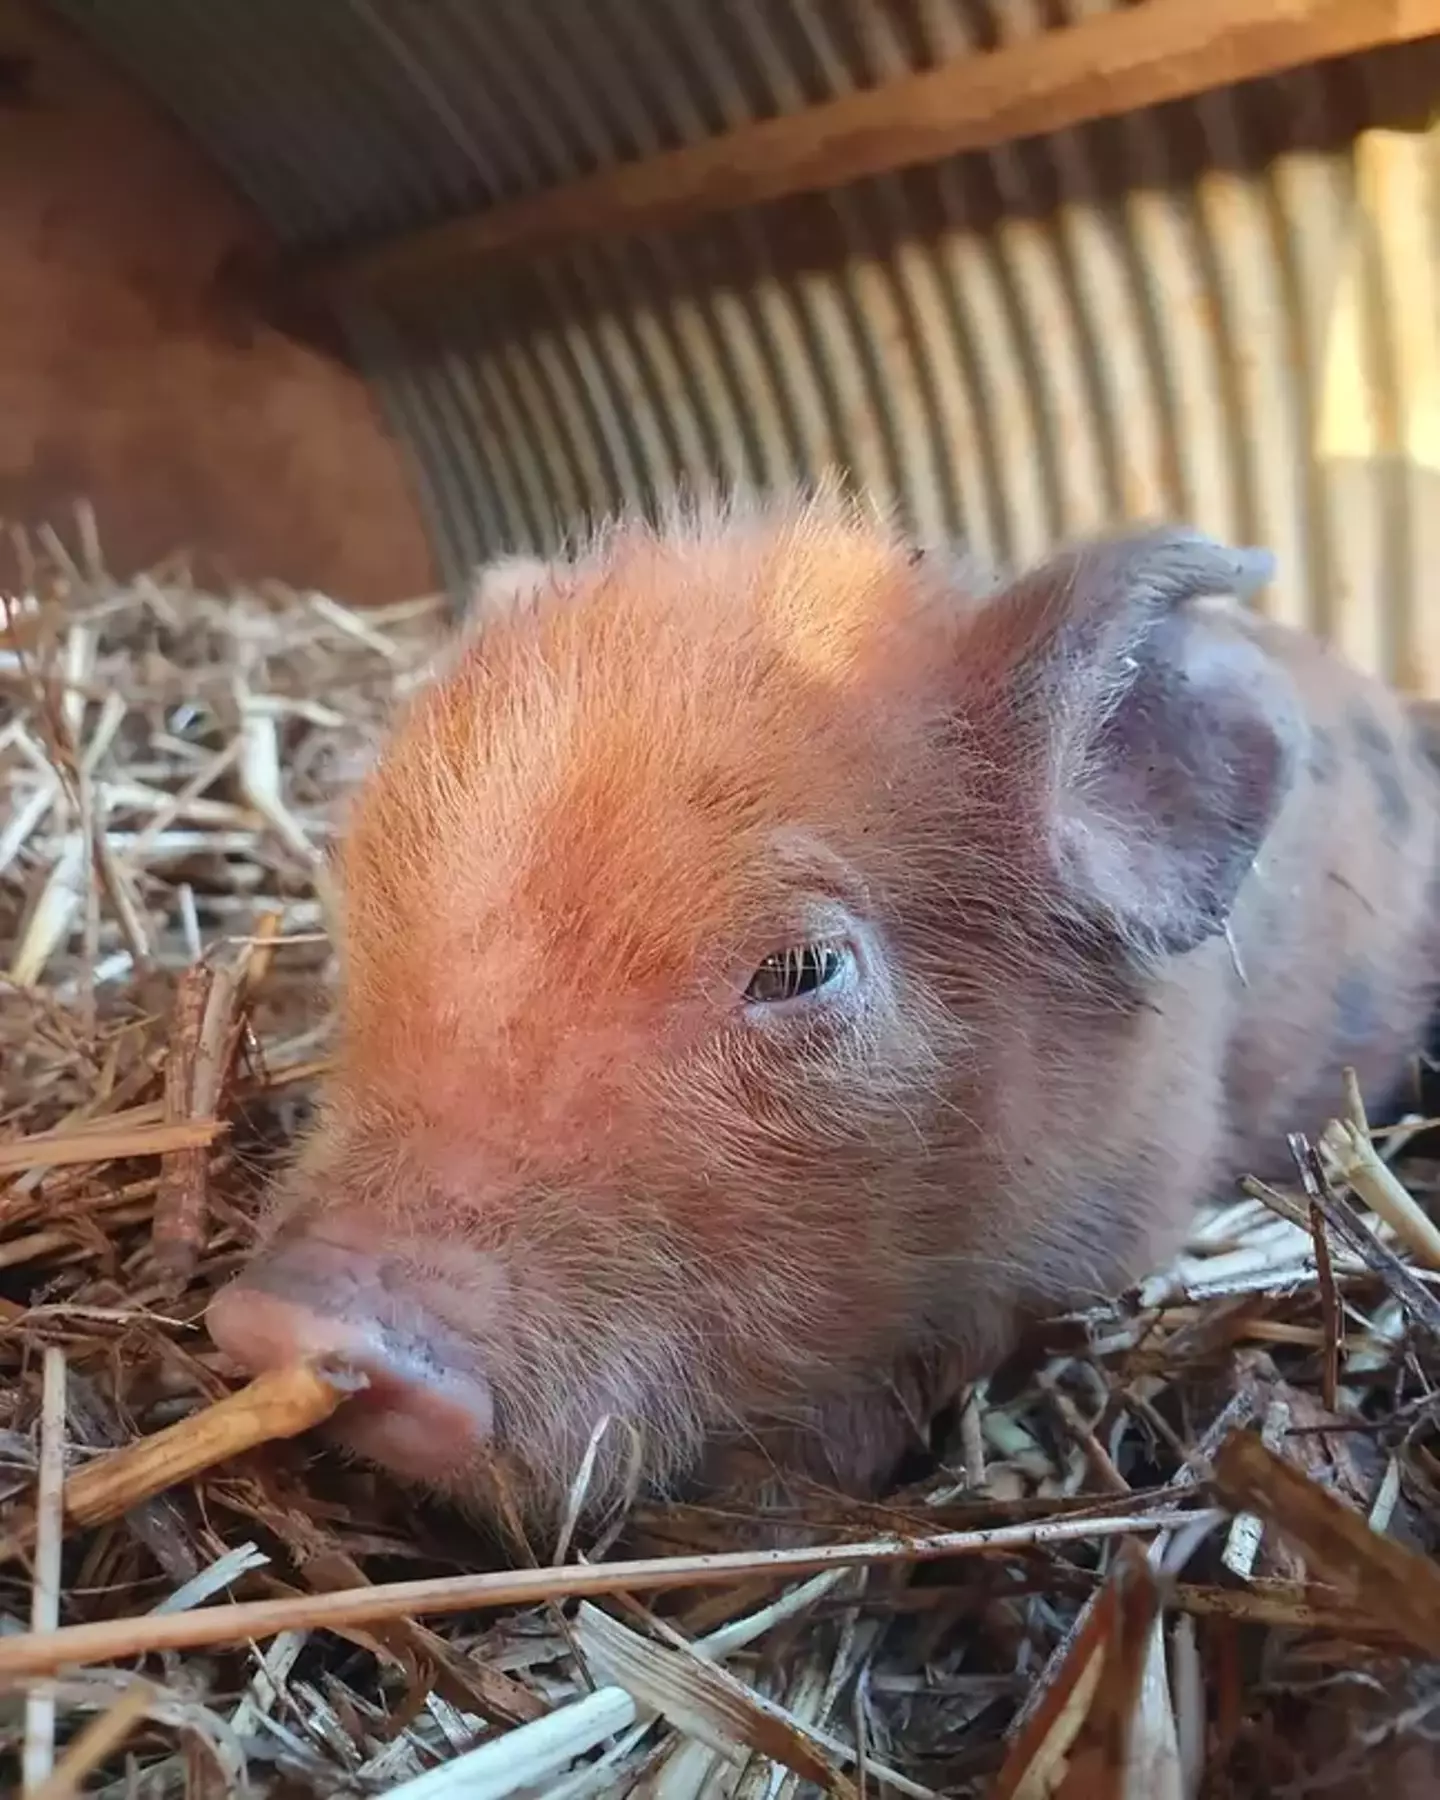 The adorable piglet sadly passed away.